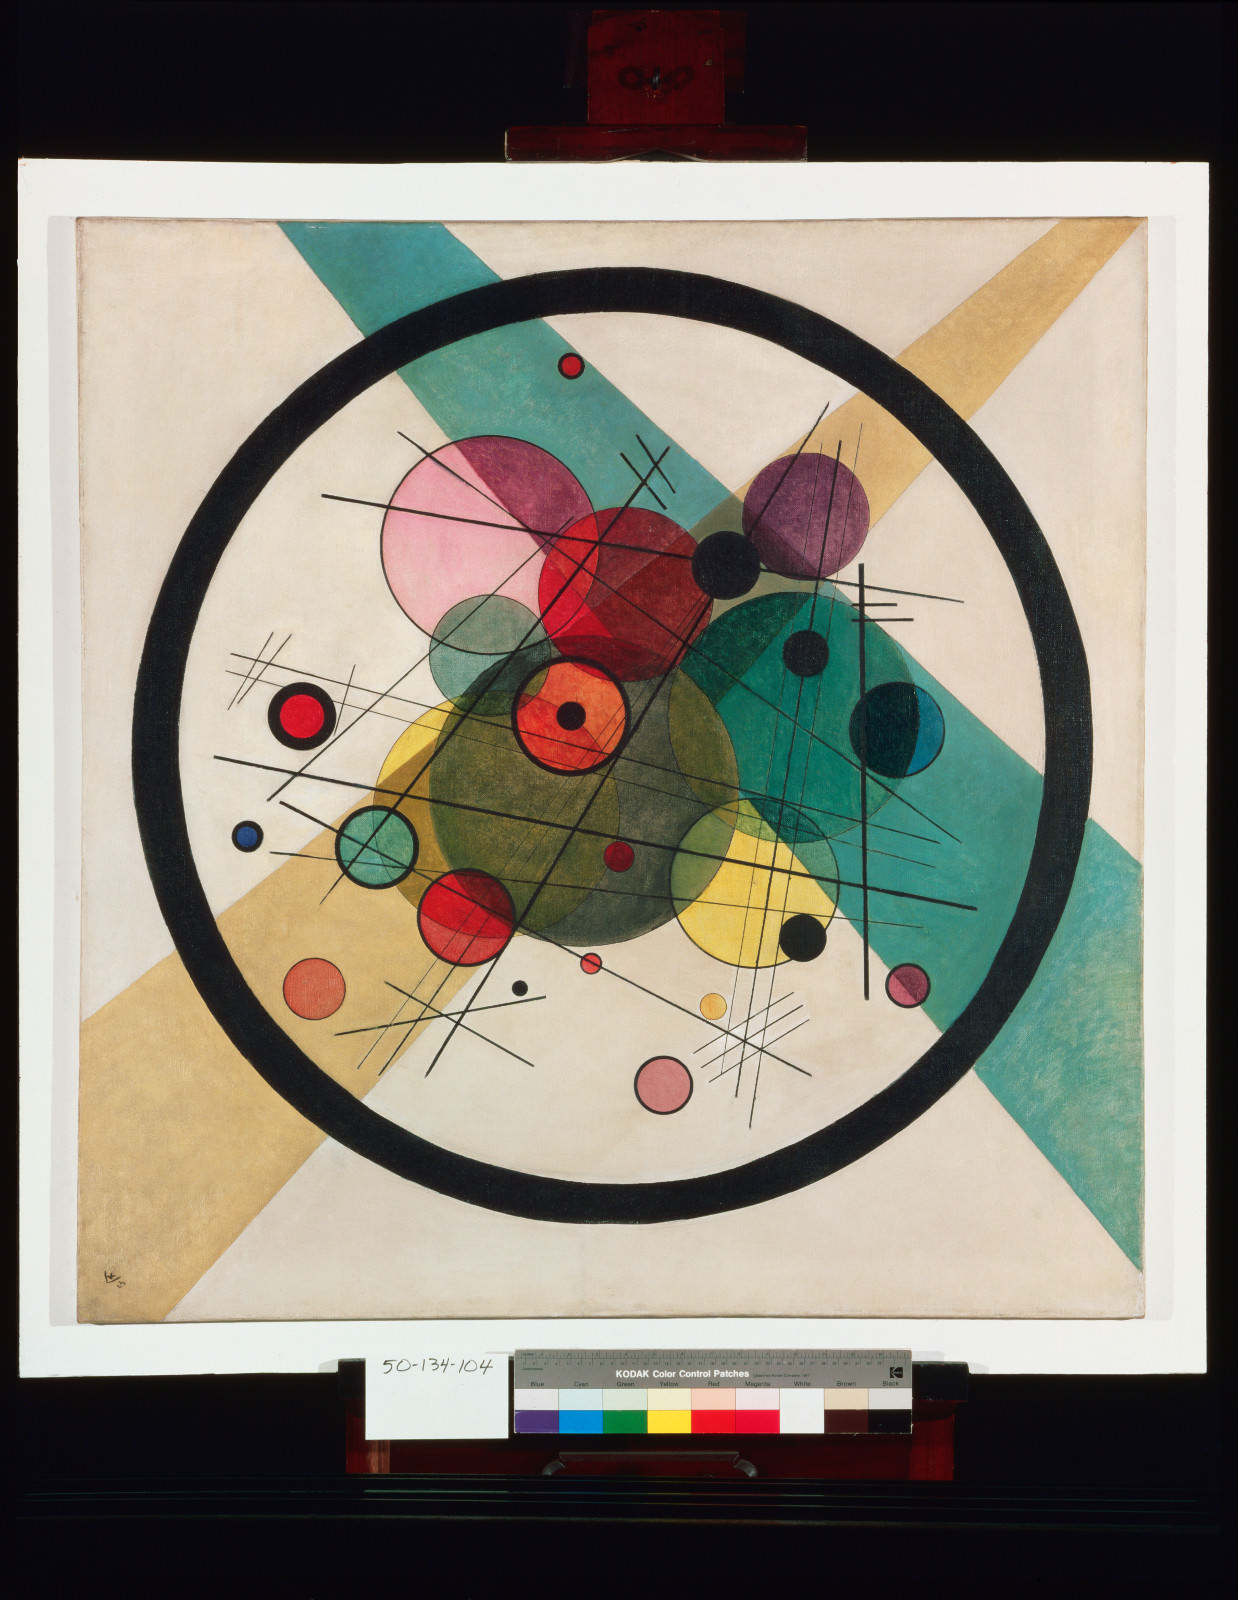 Fig. 5 – Vasily Kandinsky, Circles in a Circle, 1923, oil on canvas, 38 7/8 x 37 5/8 polegadas (98.7 x 95.6 cm) Framed: 44 1/4 × 43 1/8 × 2 3/4 poleinches2.4 × 109.5 × 7 cm).cmhiladelphia Museum of Art, The Louise and Walter Arensberg Collection, 1950-134-104.